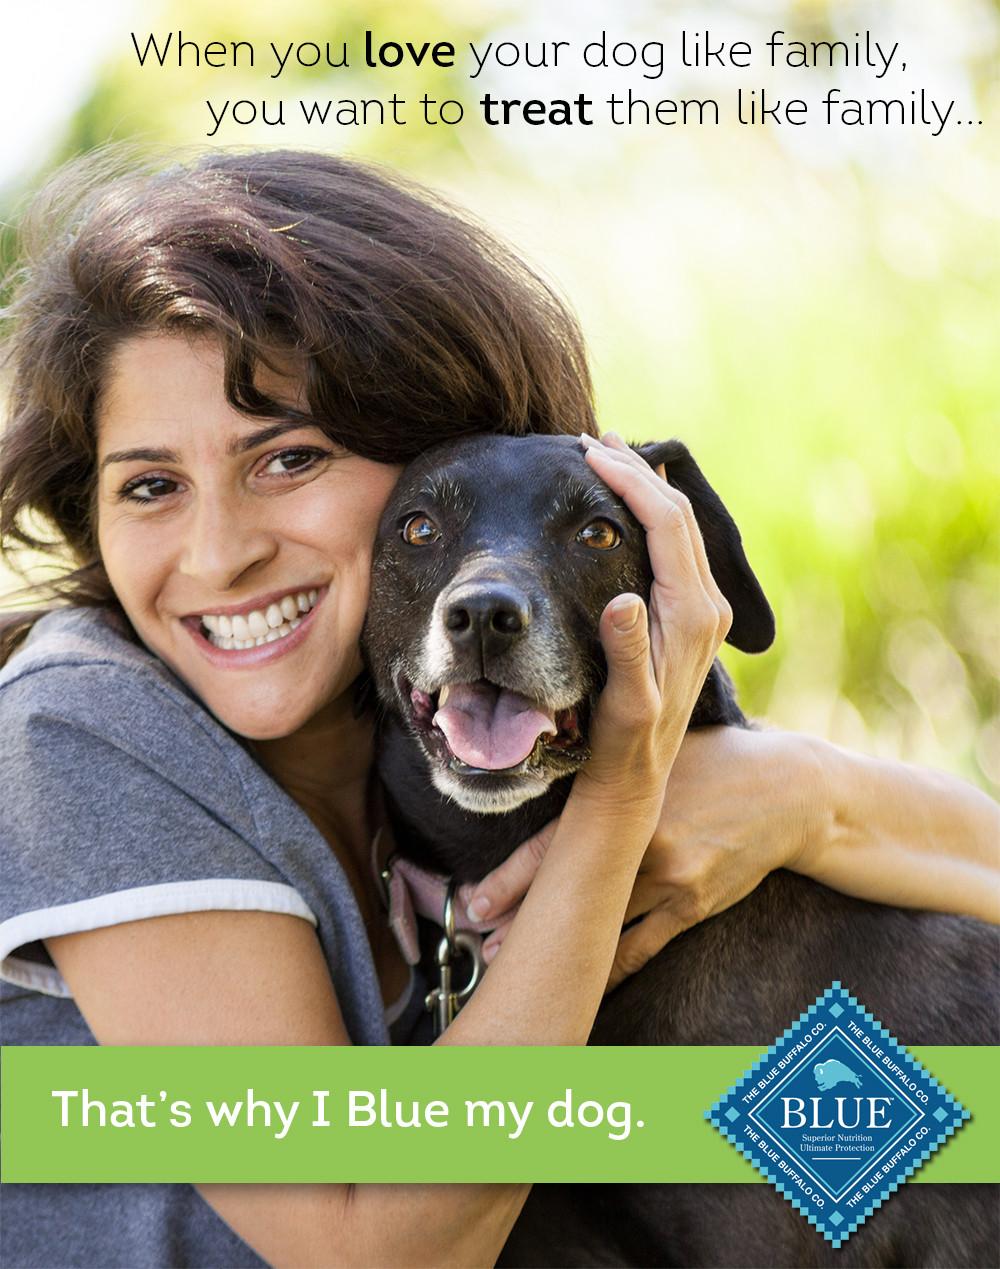 prove you have a dirty mind - When you love your dog family, you want to treat them family... The Blue Buffalo Co. That's why I Blue my dog. The Blue Buffalo Co. Blue The Blue Buffalo Co. Superior Nutrition Ultimate Protection The Blue Buffalo Co.